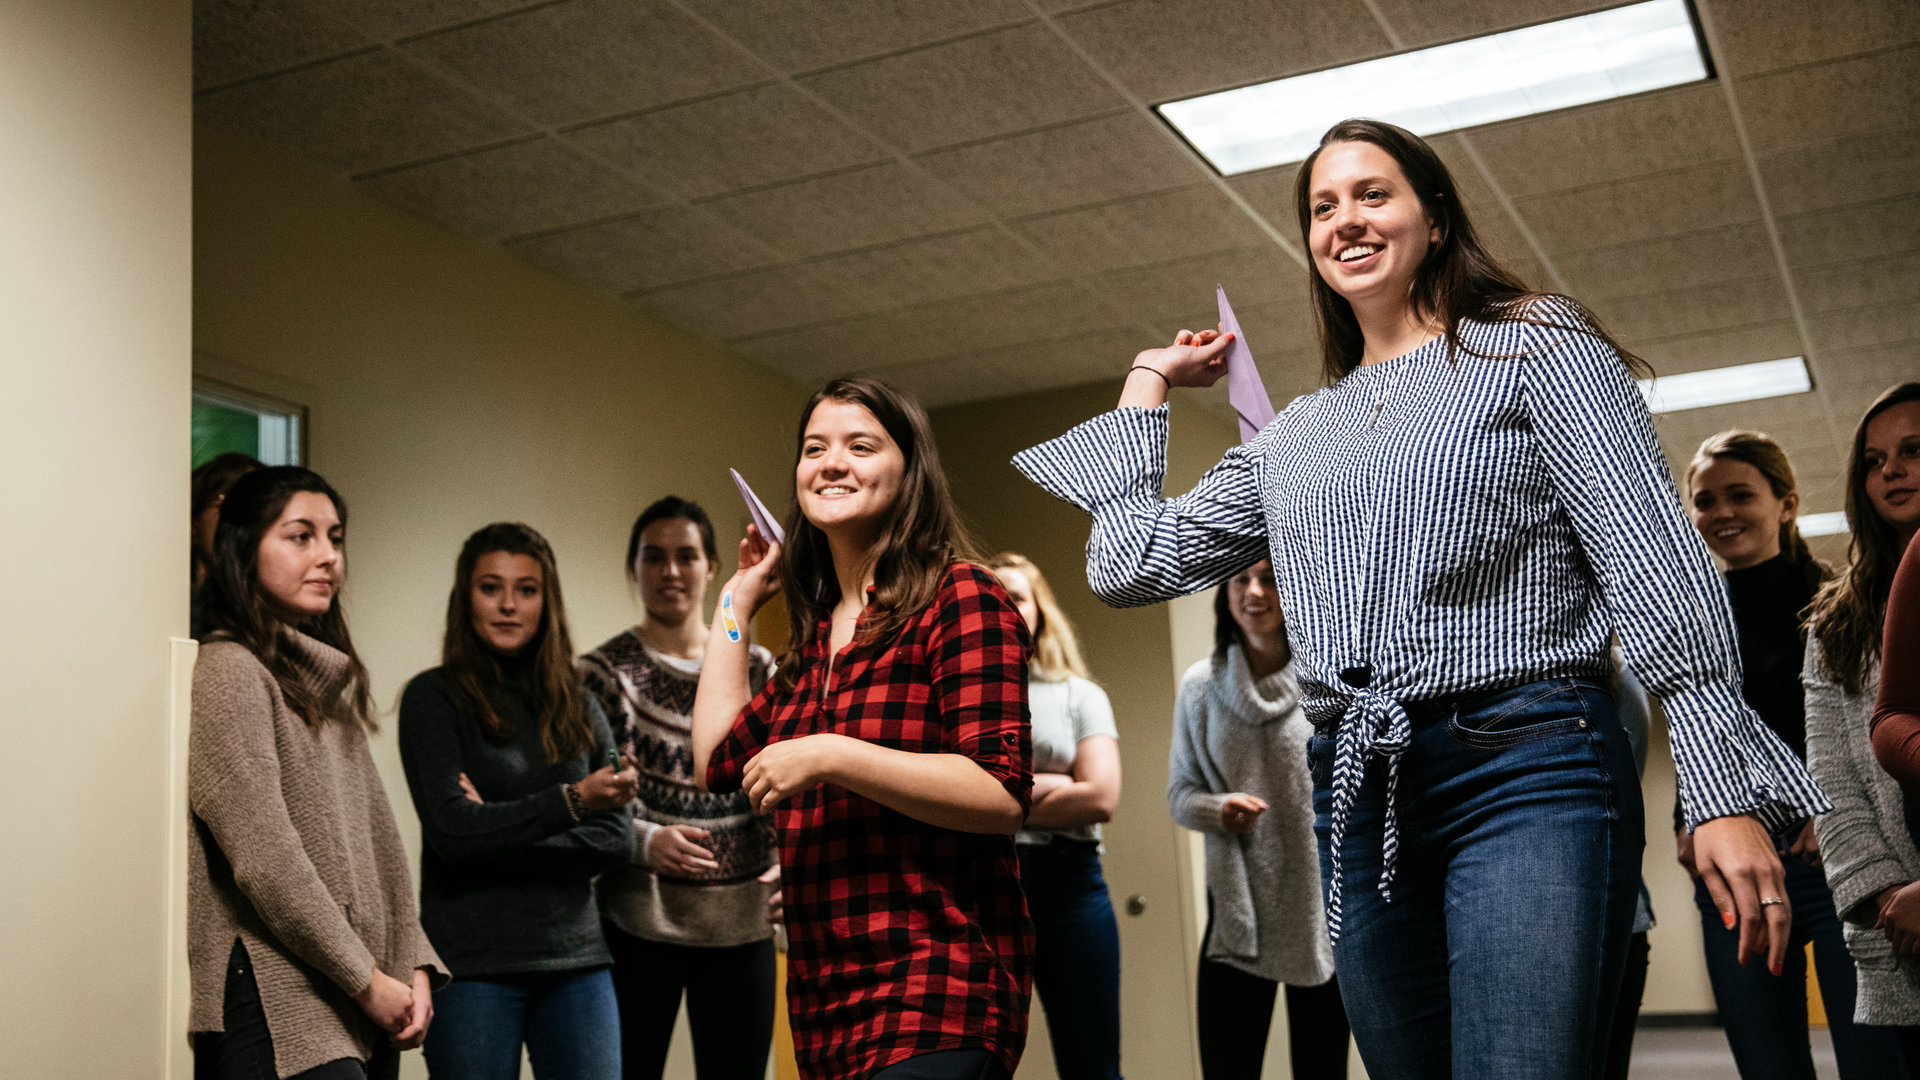 students throw paper airplanes during an education class dedicated to engineering